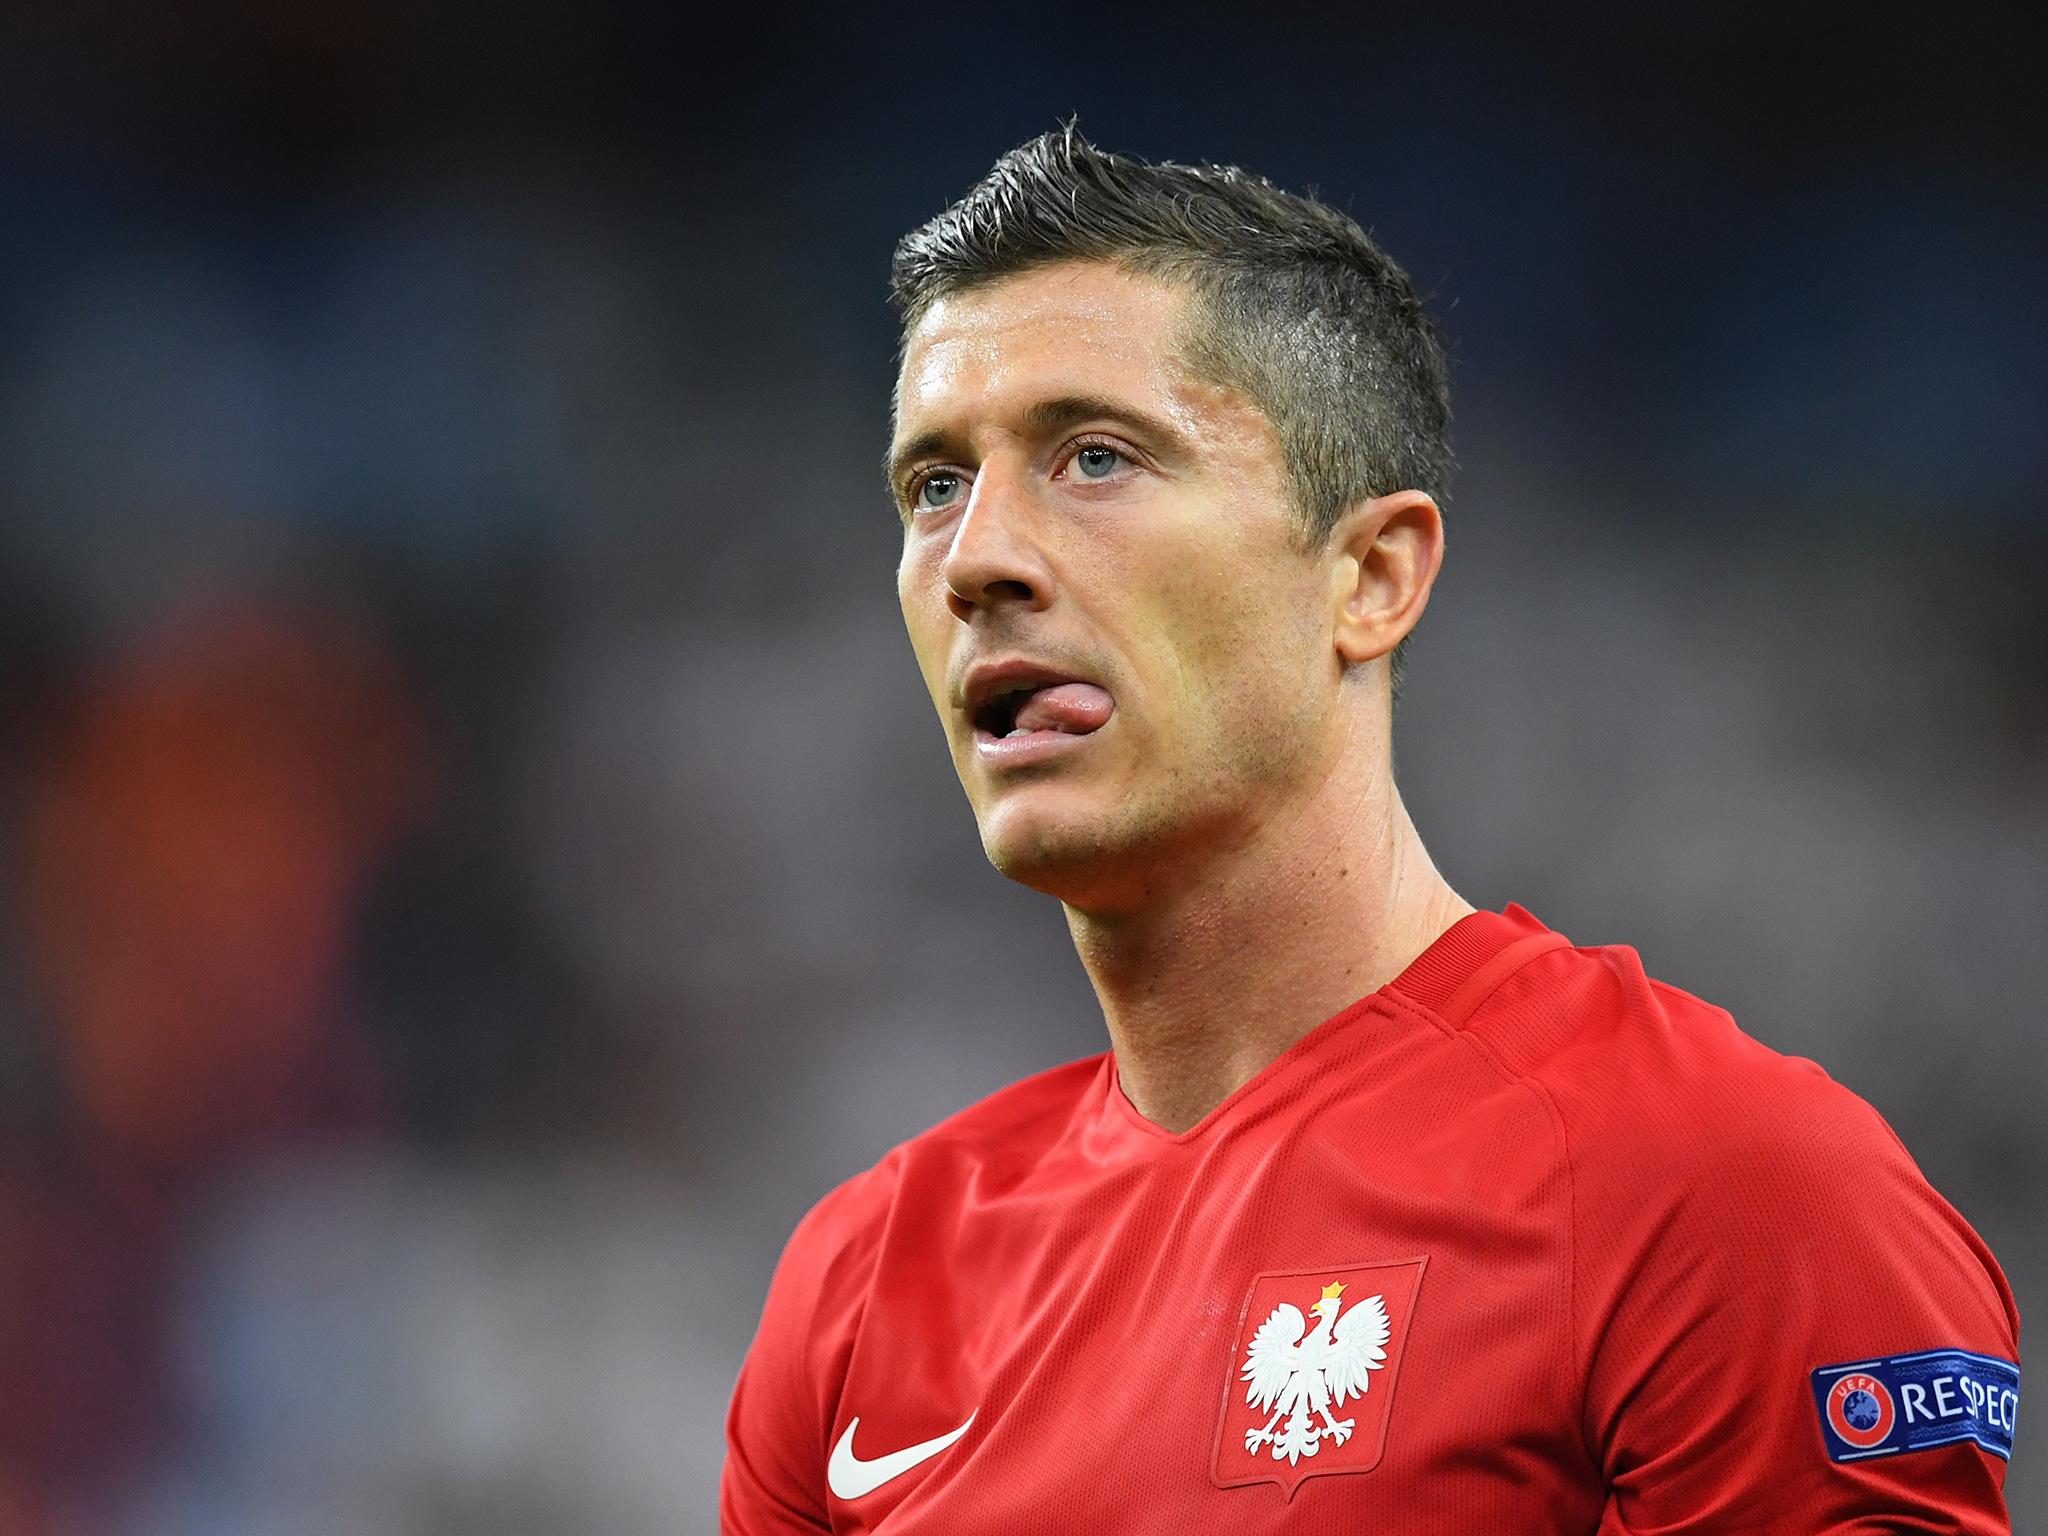 Robert Lewandowski will be hoping to notch his first goal of the tournament